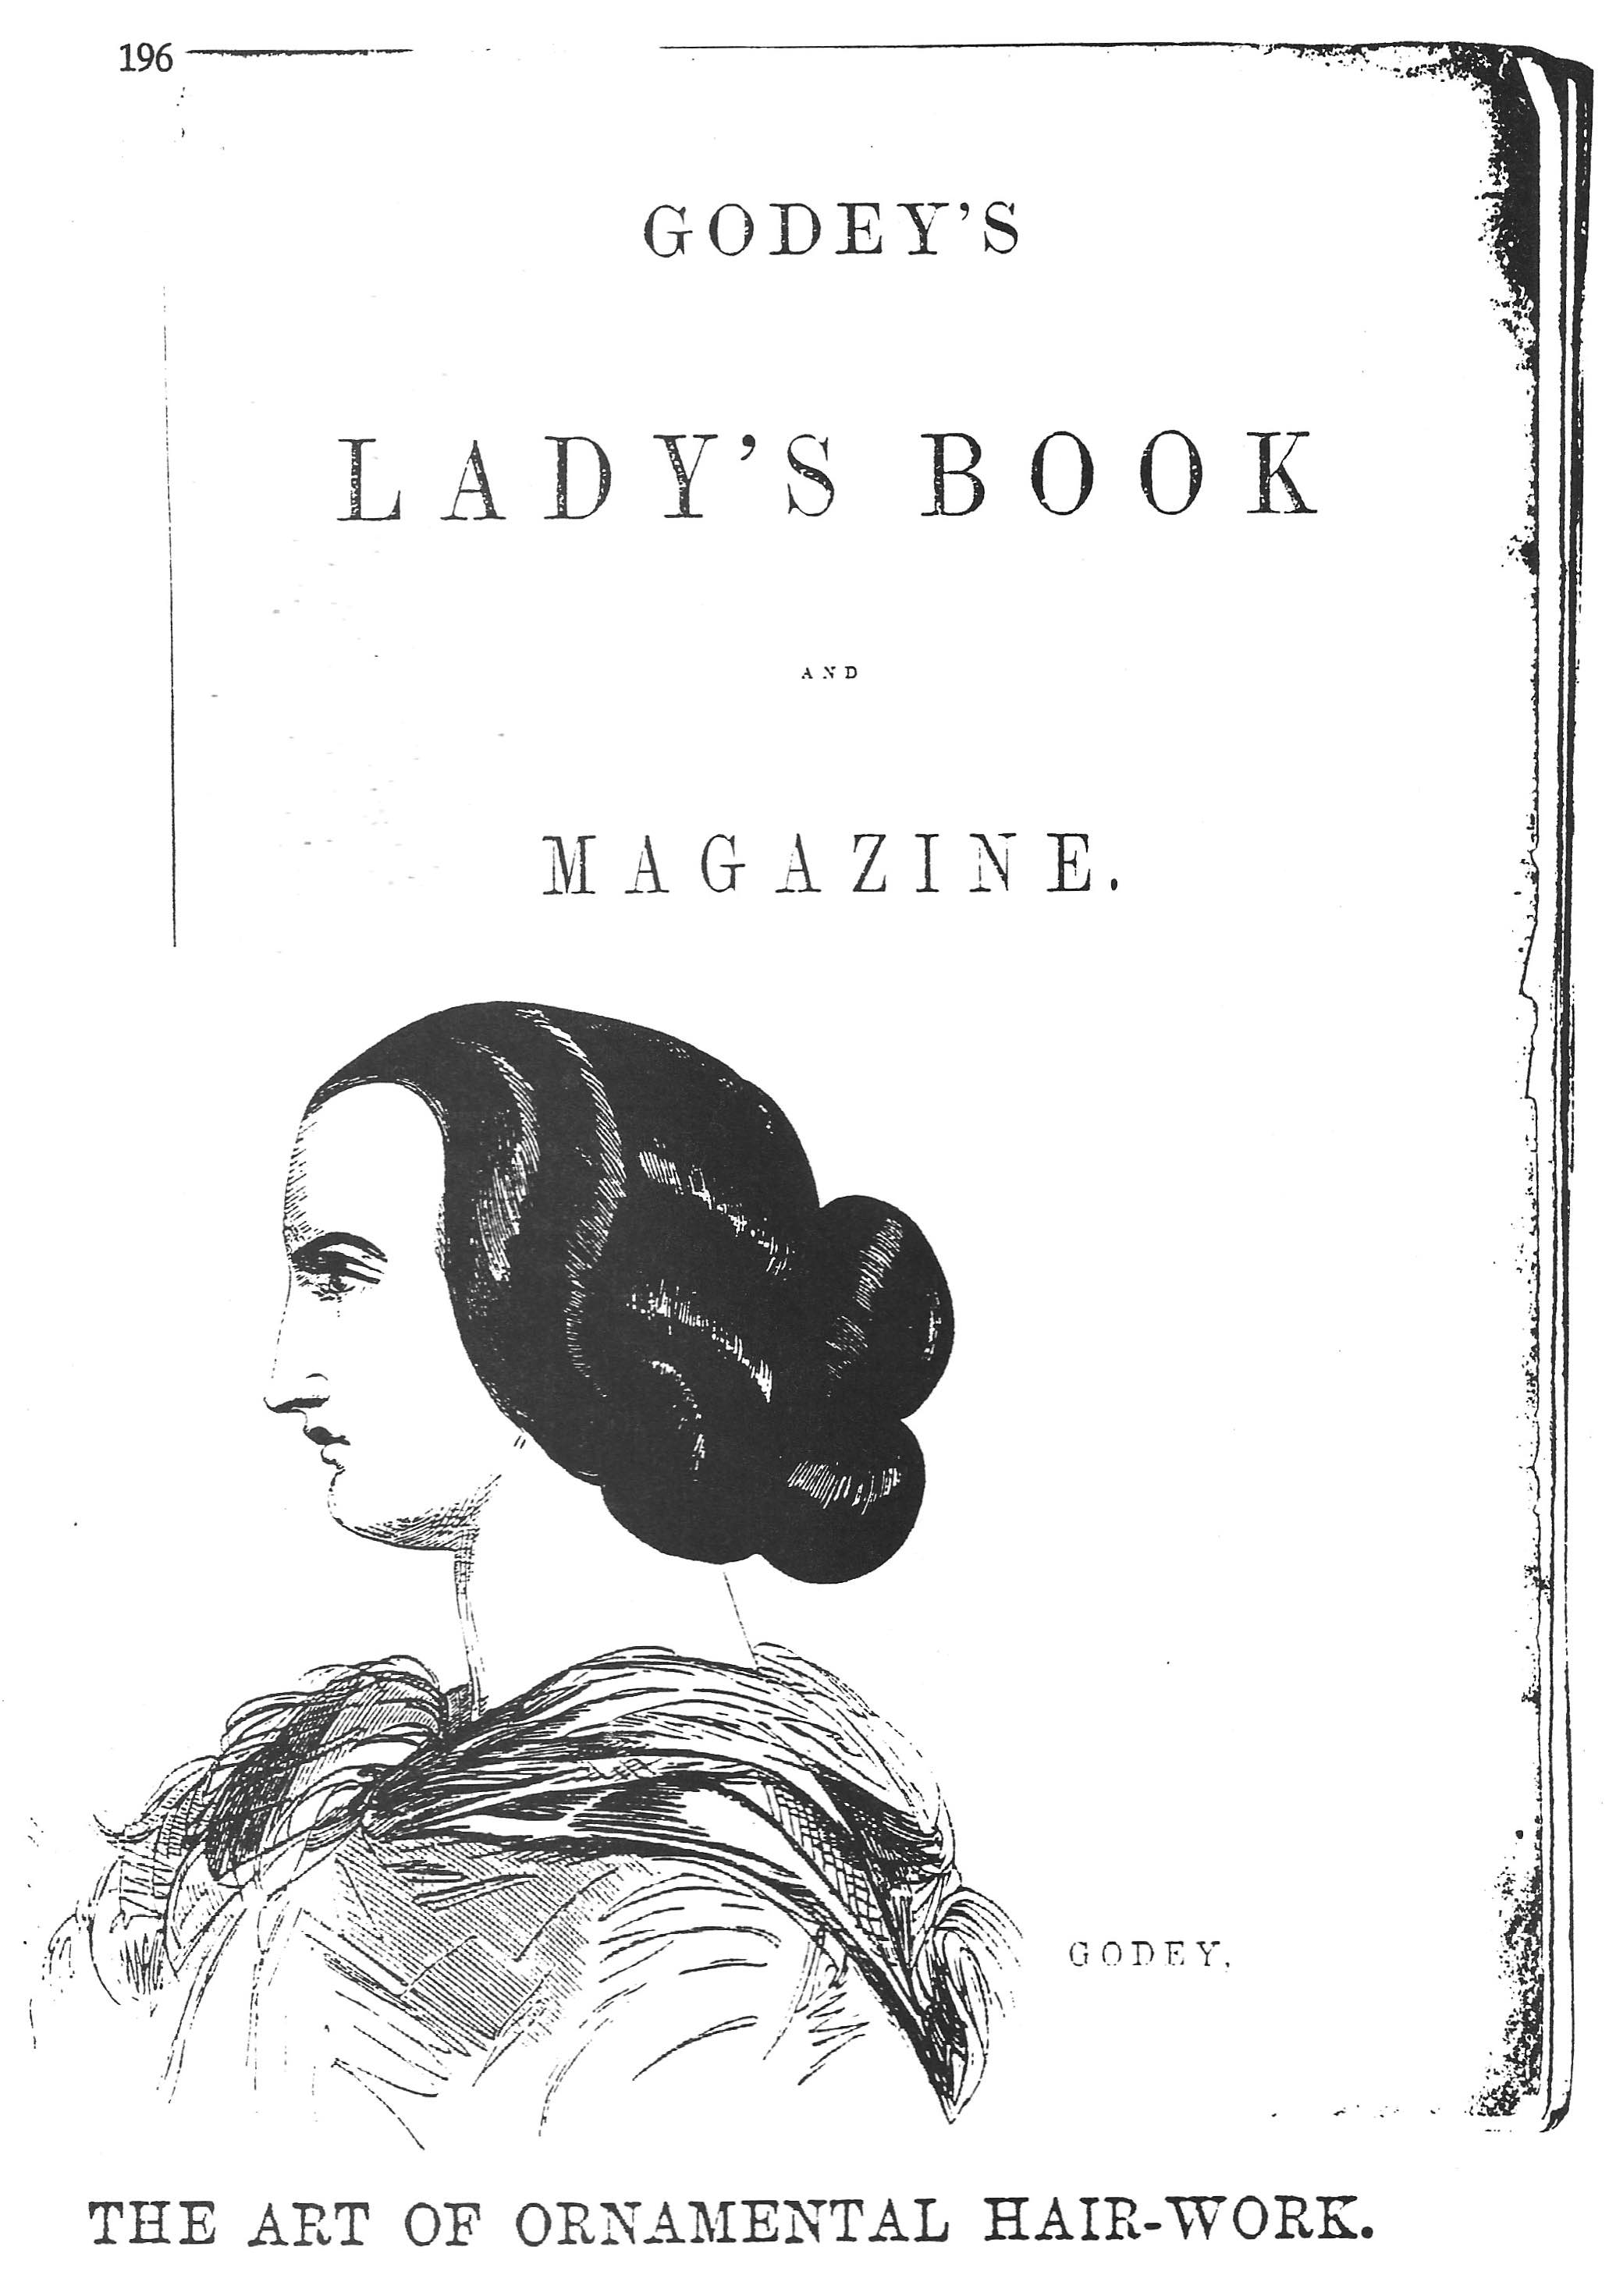 Image of Godey's Lady's Book, from The Art of Hair Work: Hair Braiding and Jewelry of Sentiment